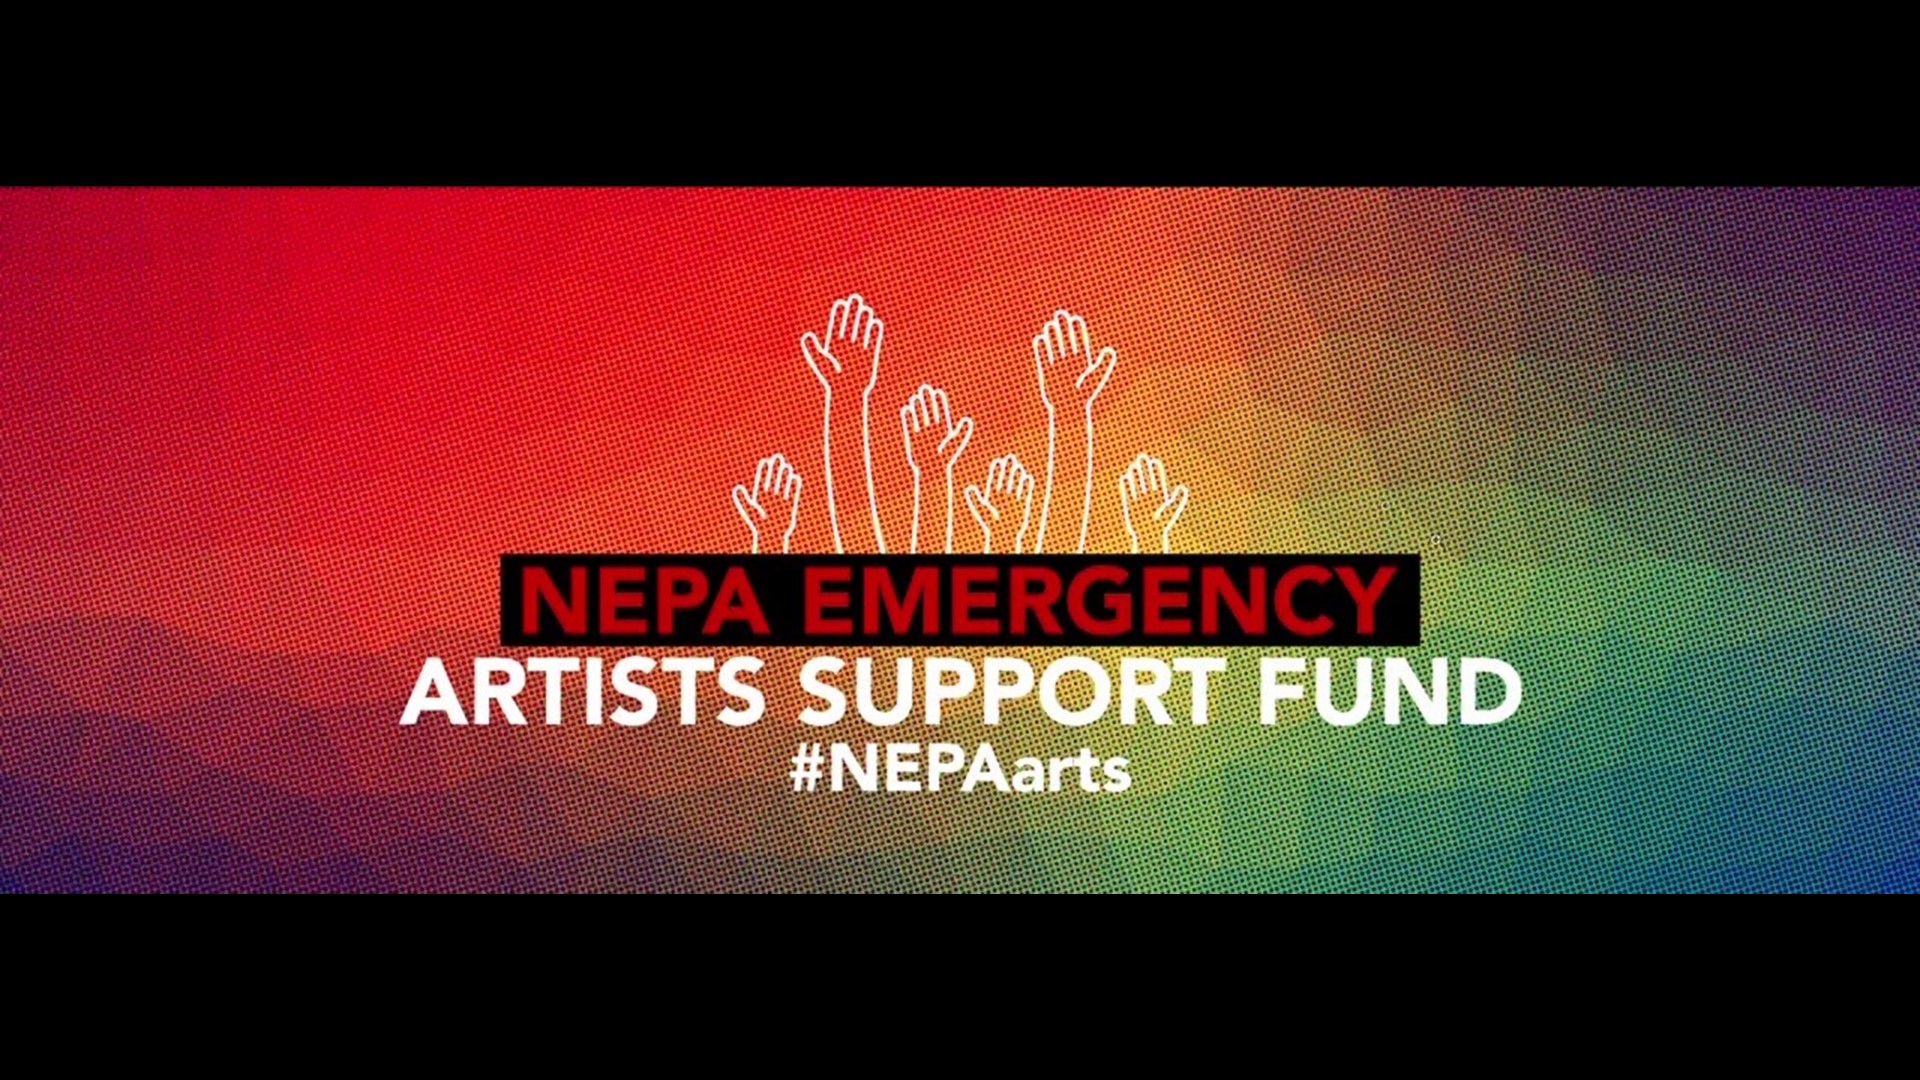 The fund provides payments to local artists who are out of work during the pandemic.